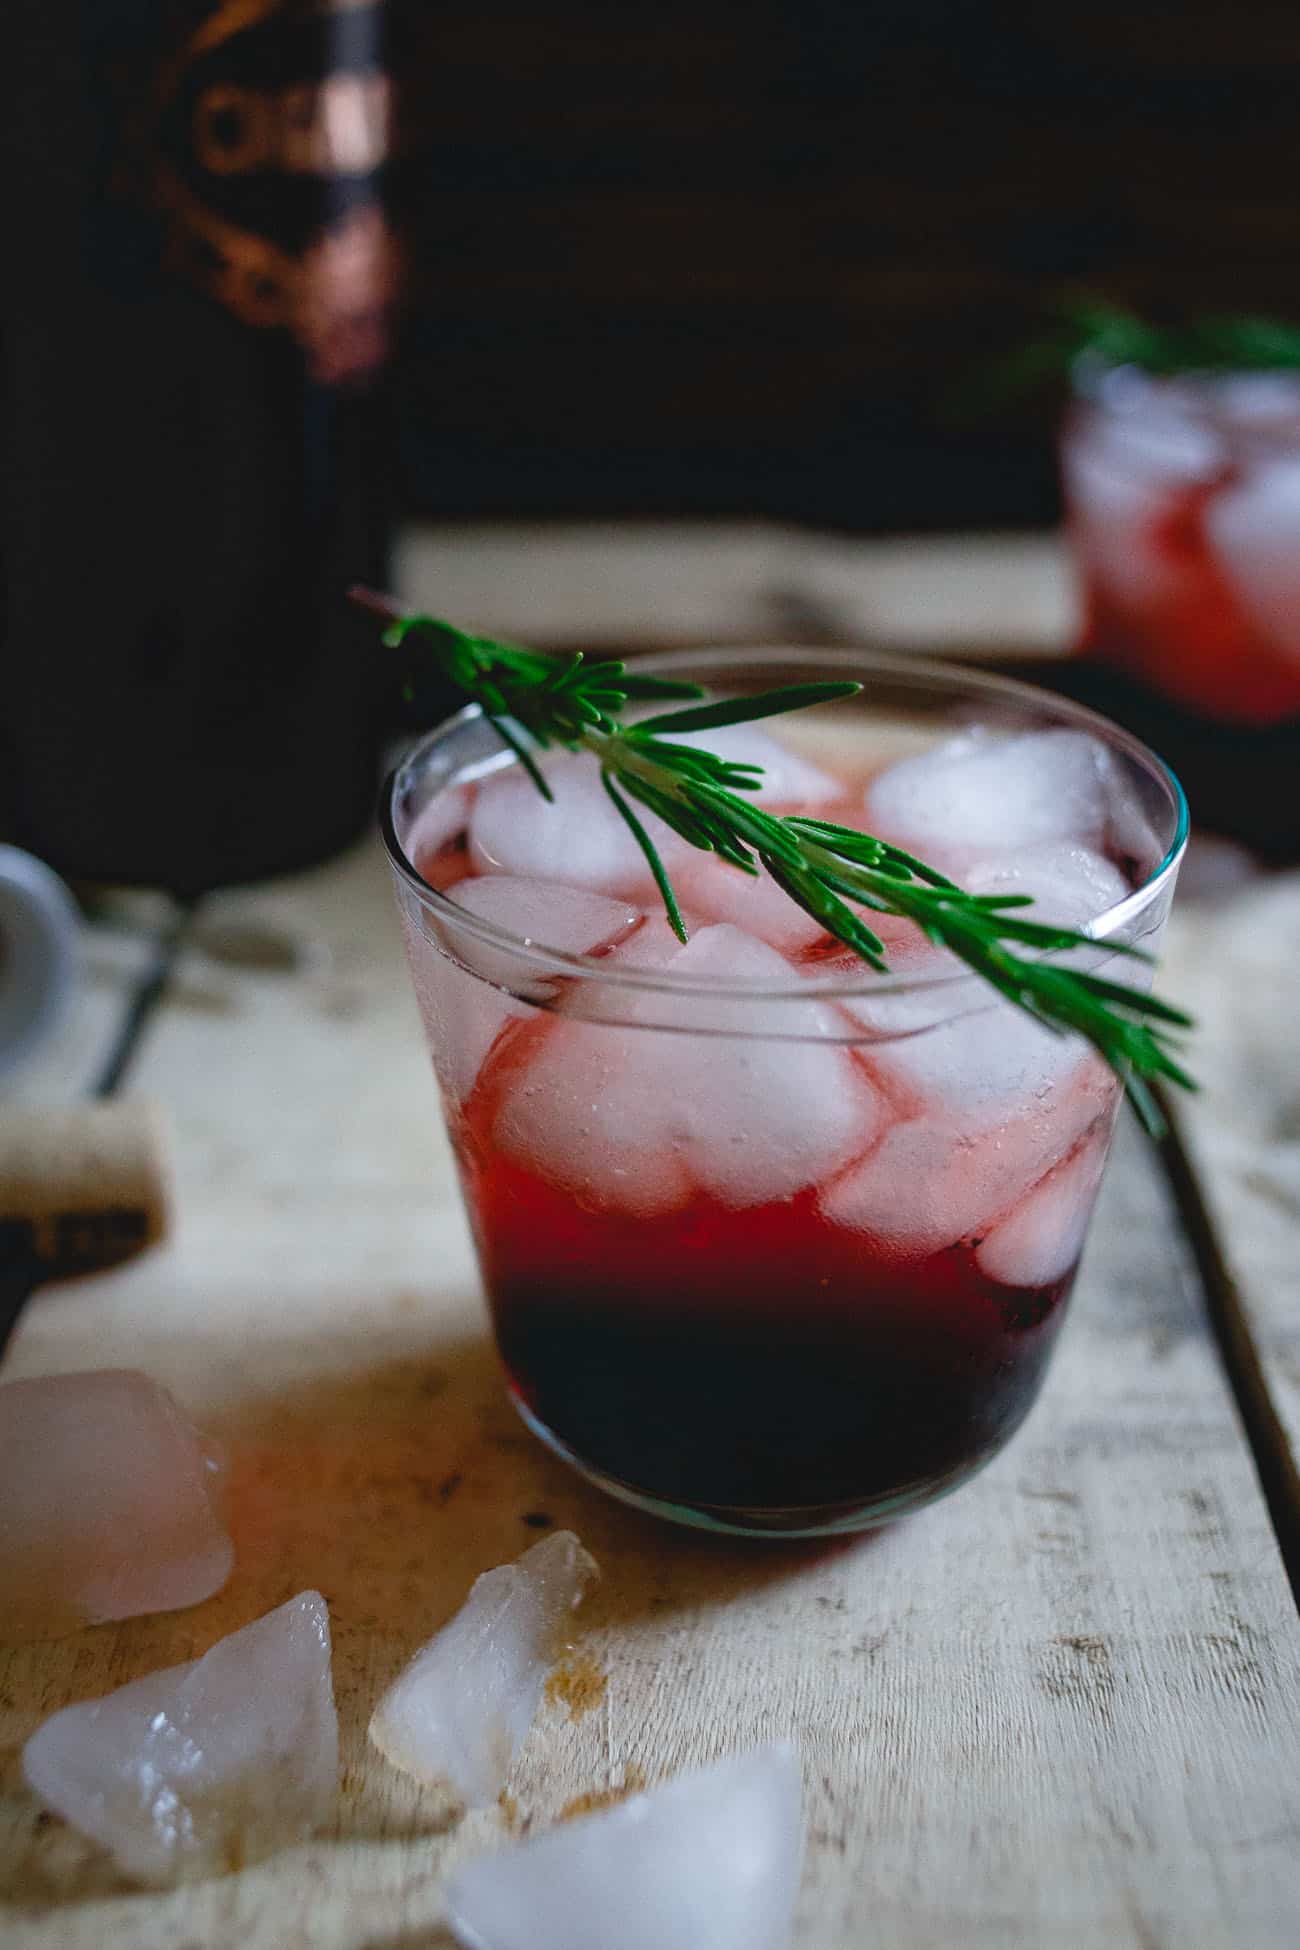 Jazz up that glass of red with this tart cherry red wine spritzer. It's infused with rosemary for a seasonal twist!